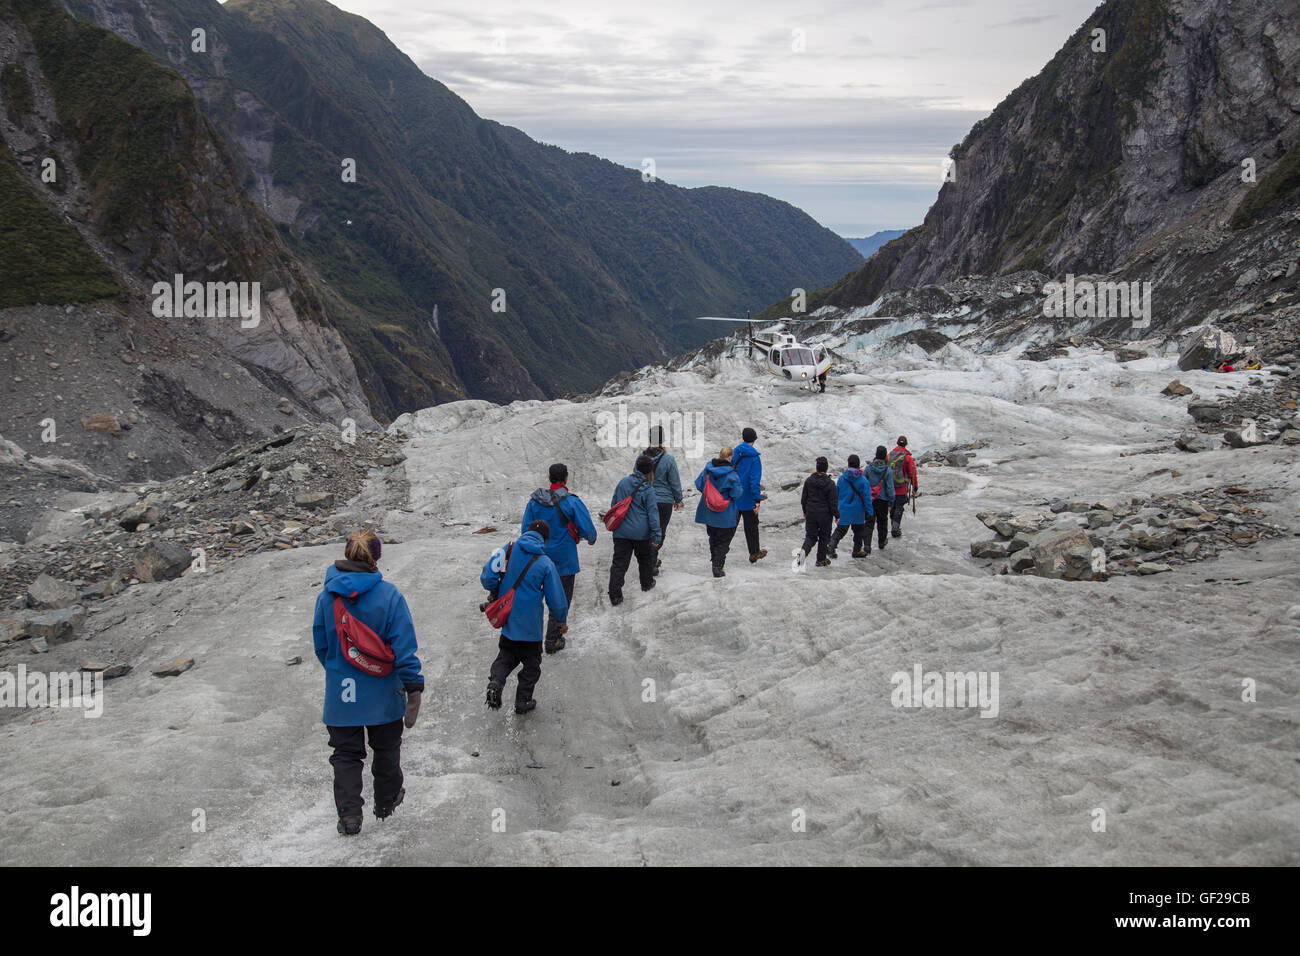 Franz Josef, New Zealand - March 22, 2015: A group of tourists hiking towards a helicopter on the Franz Josef Glacier. Stock Photo